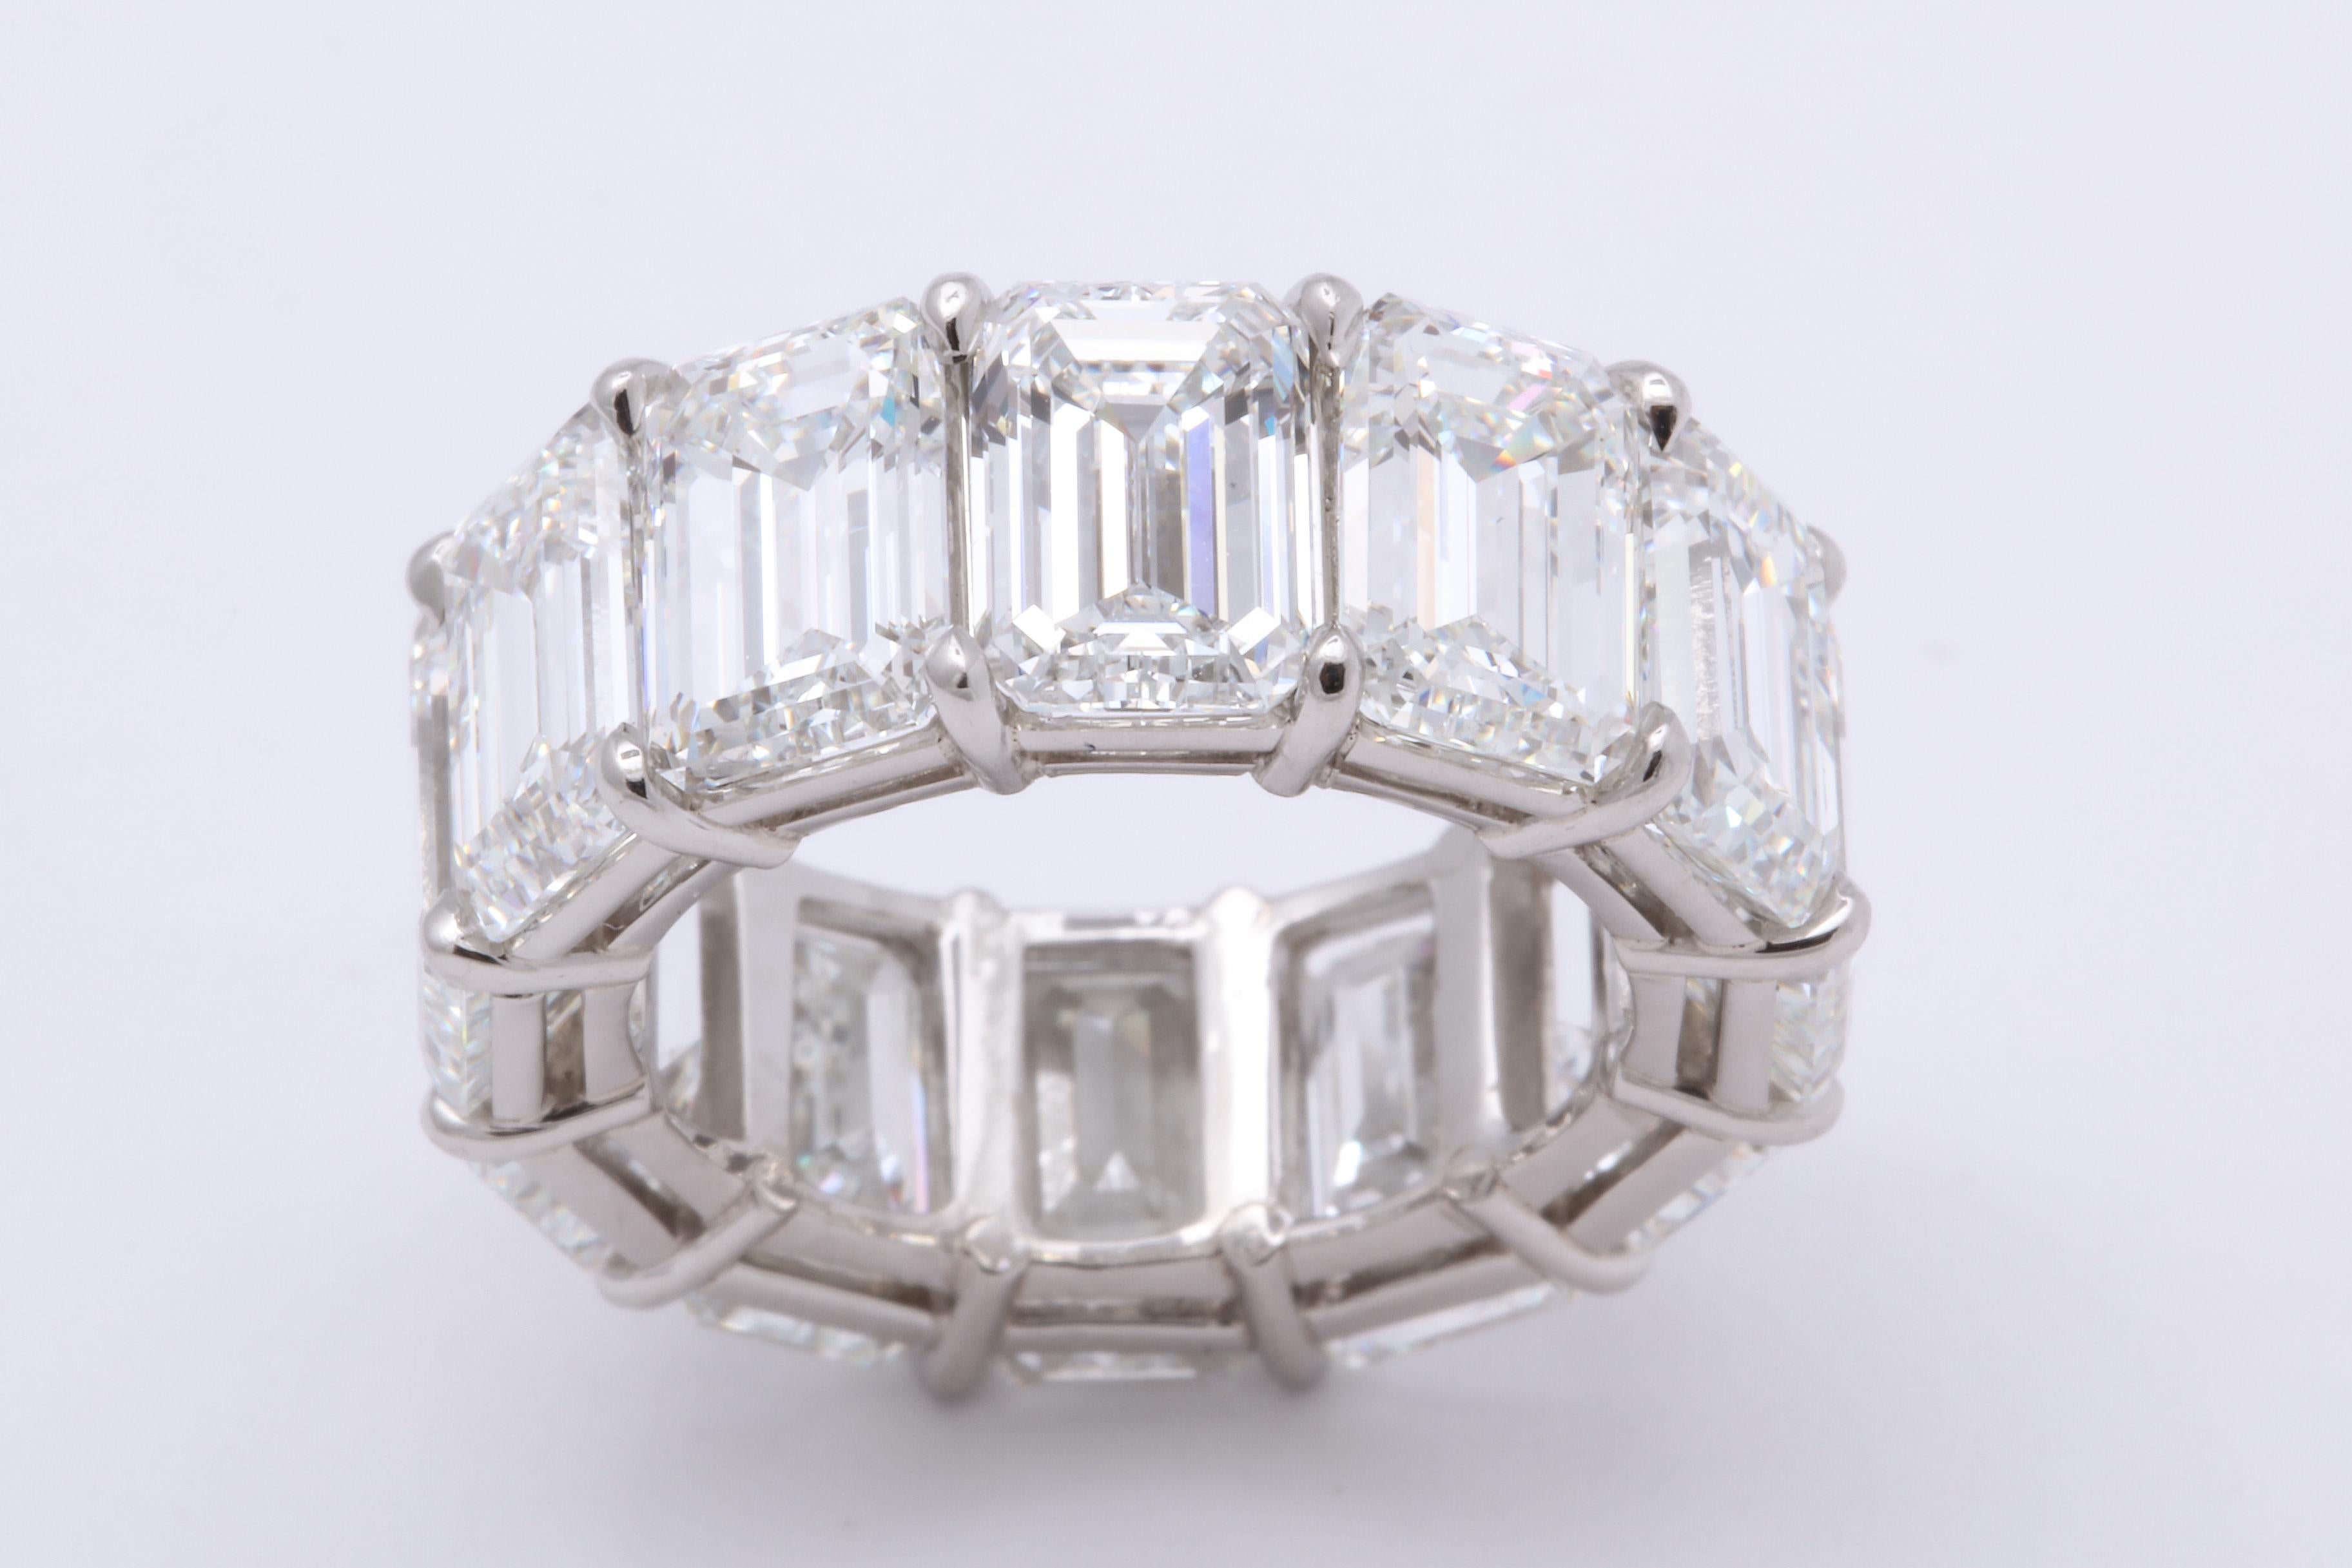 
An EXCEPTIONAL piece, only found in the worlds highest jewelry houses. 

Important emerald cut diamond eternity band featuring 12 Emerald Cut diamonds each with its own GIA certificate. The 12 diamonds make up a total of 18.51 carats. Each of the